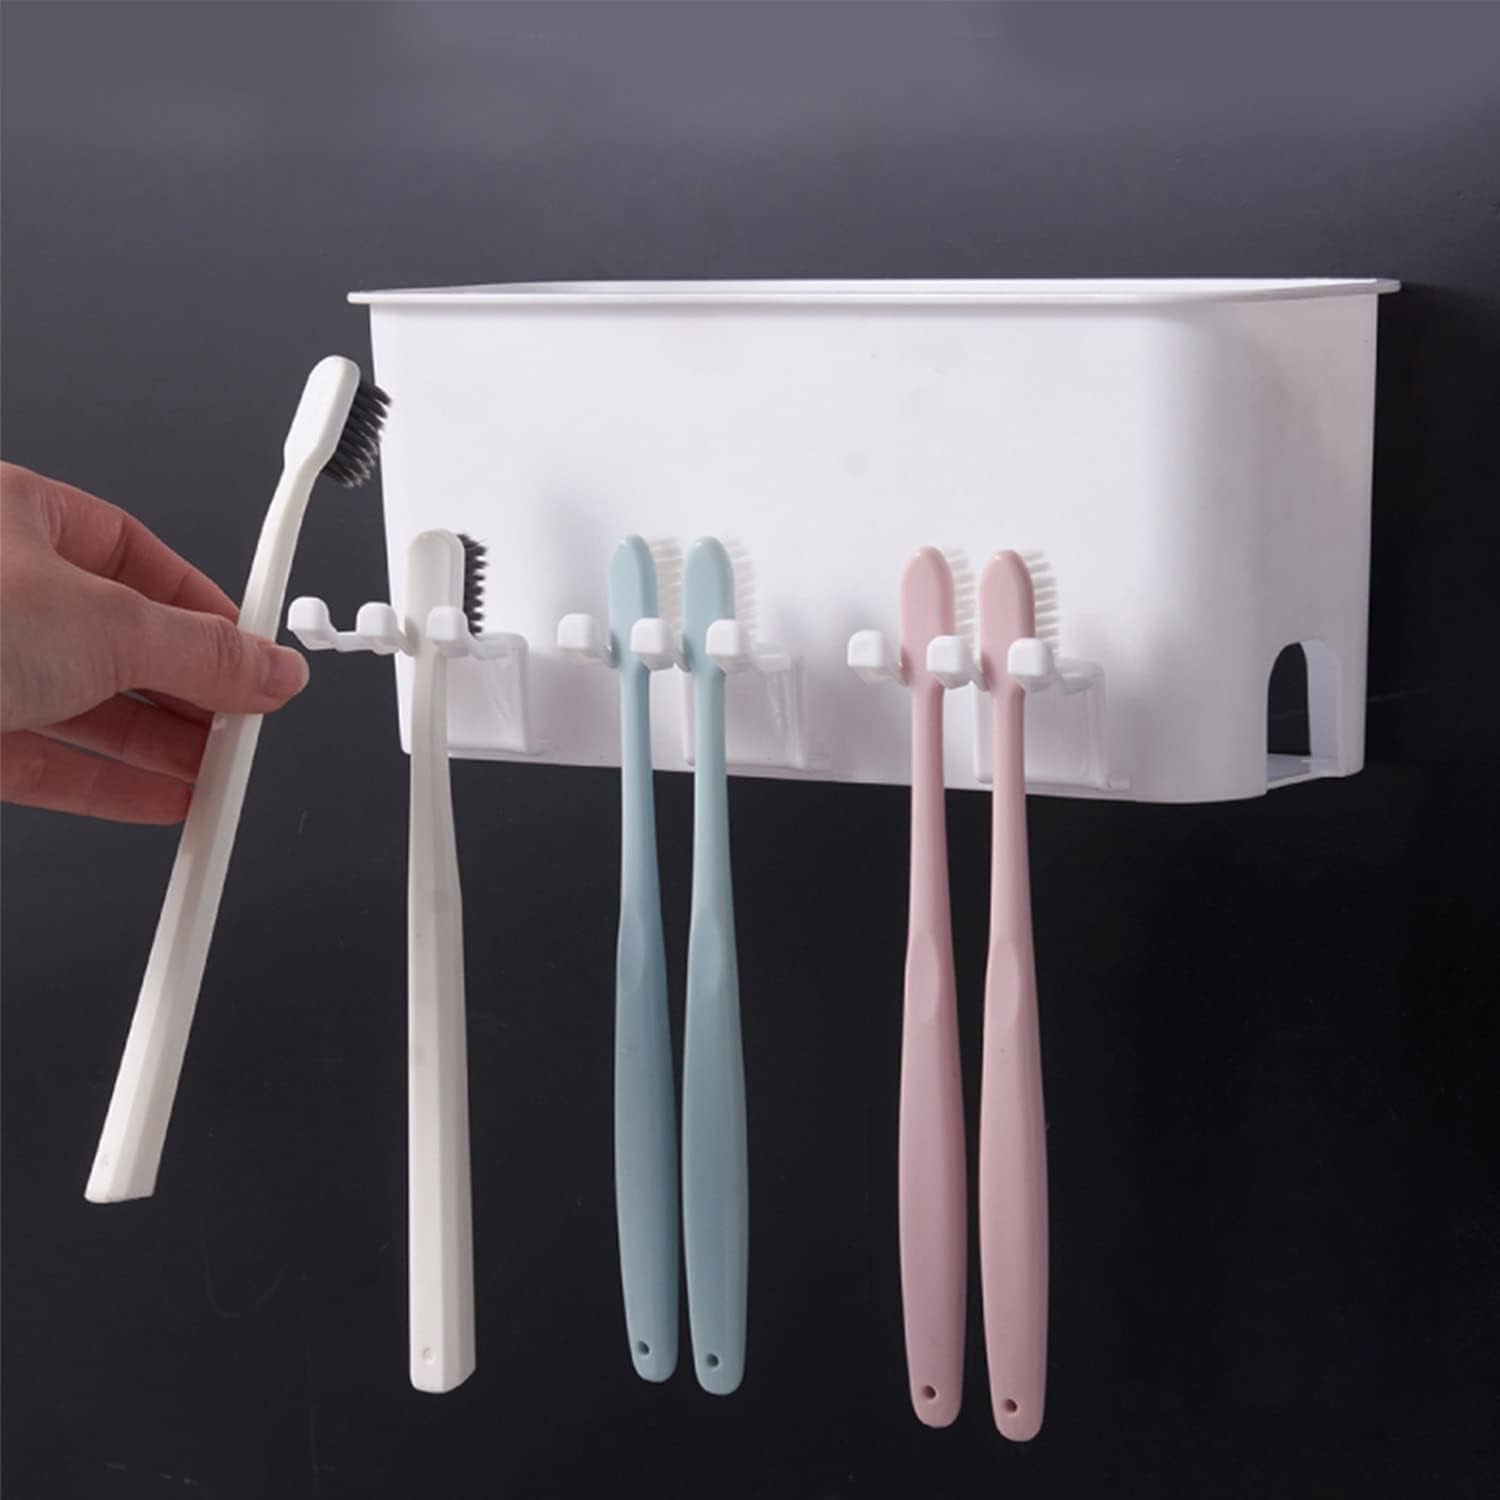 Wall Mount Toothbrush Holder with 3 & 2 Cups Automatic Toothpaste Holder Multi-Functional Kids Favorite Candy Toothbrush Holder Bathroom Accessories Organizer Rack